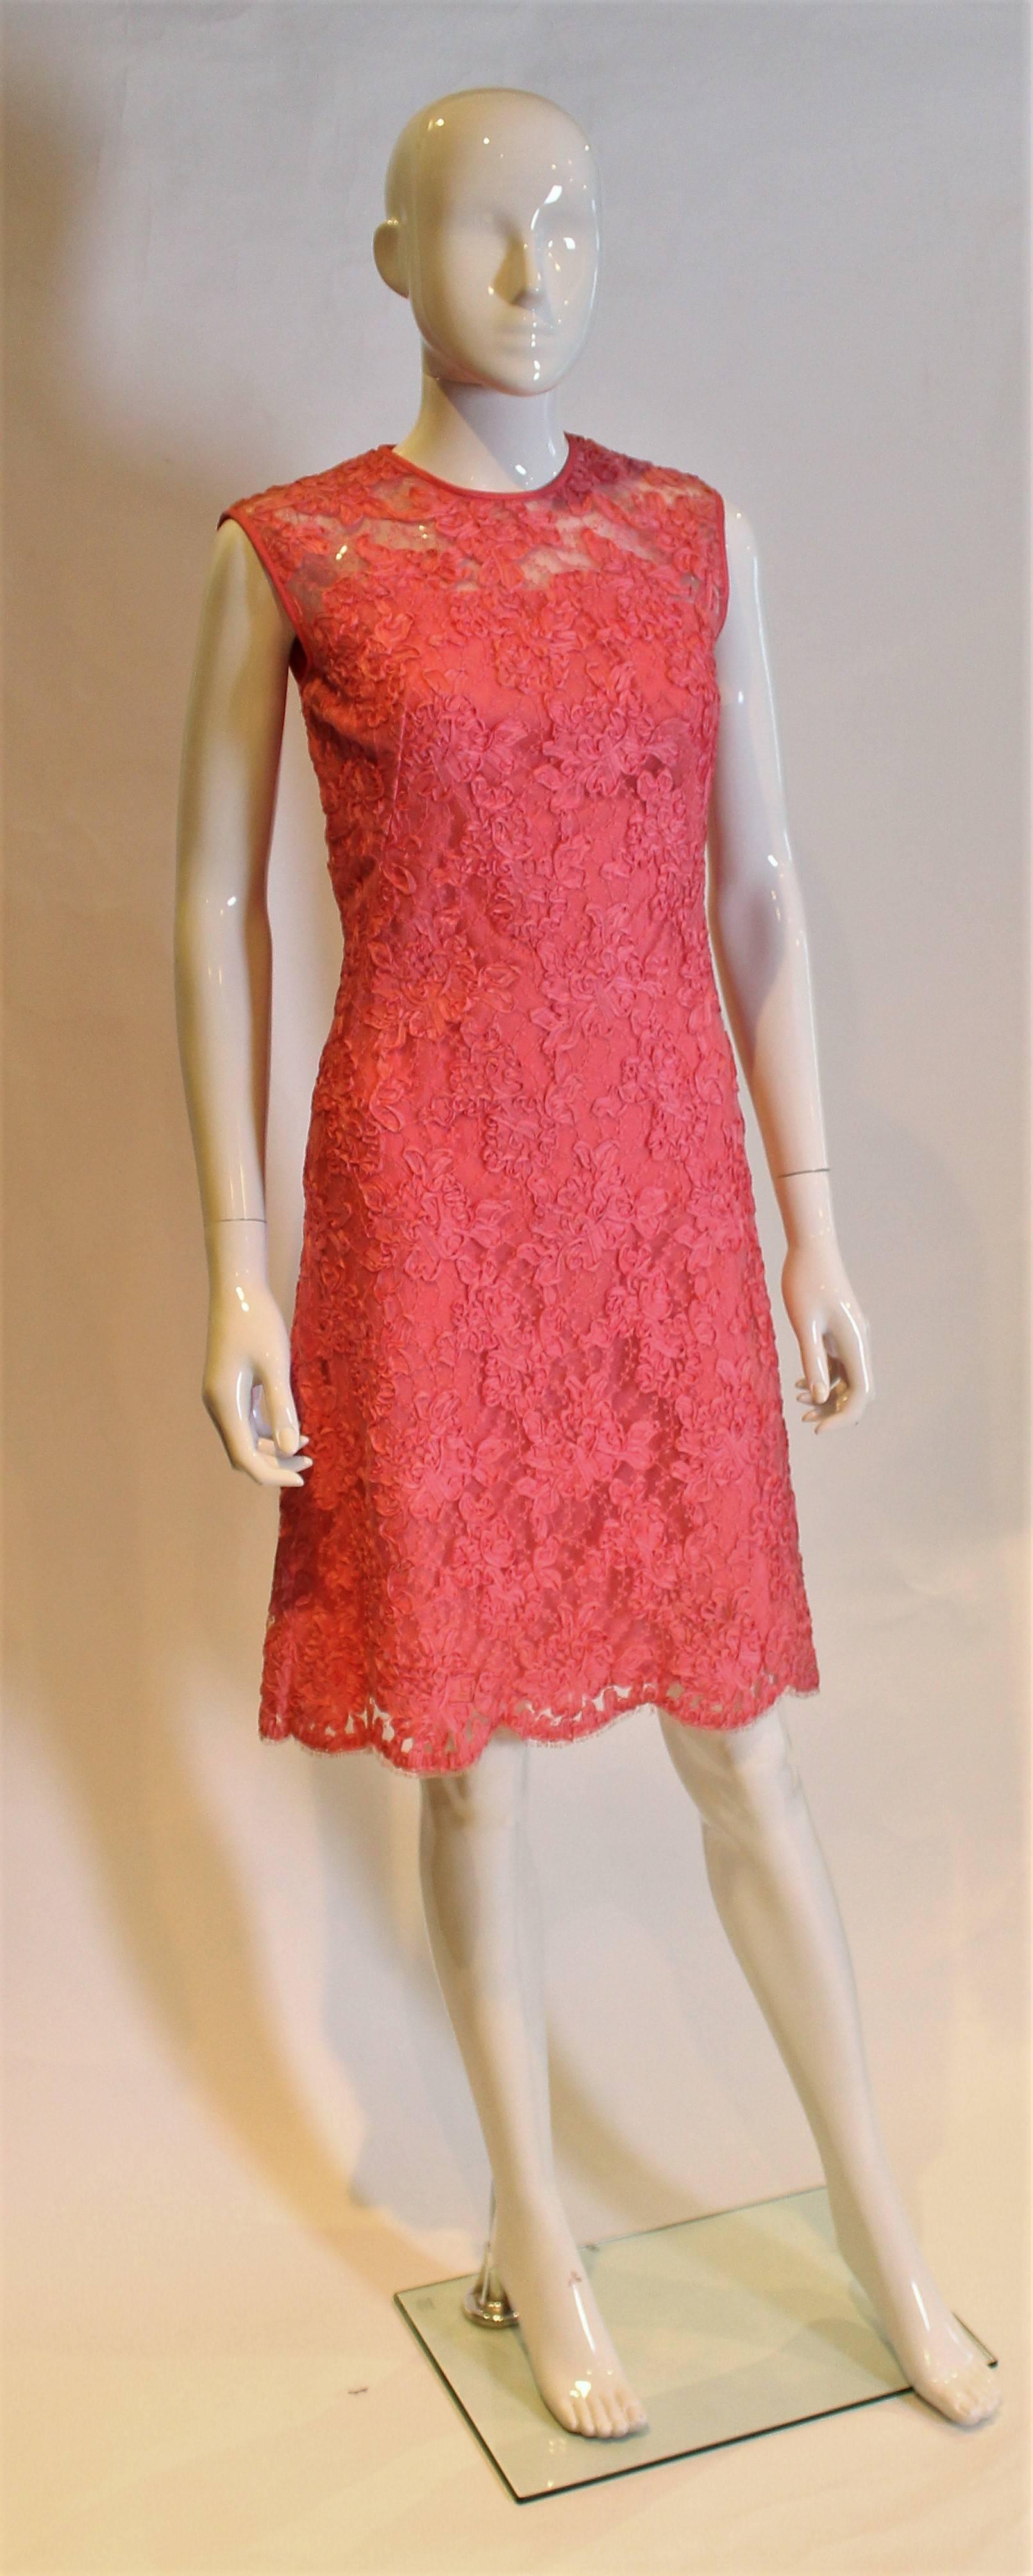 A chic and pretty dress by Wendy.This dress has a round neck and sheer net and ribbon at the top of the bust area, and is lined below.It has a key hole opening at the back, with a central back zip  and scalloped hem.